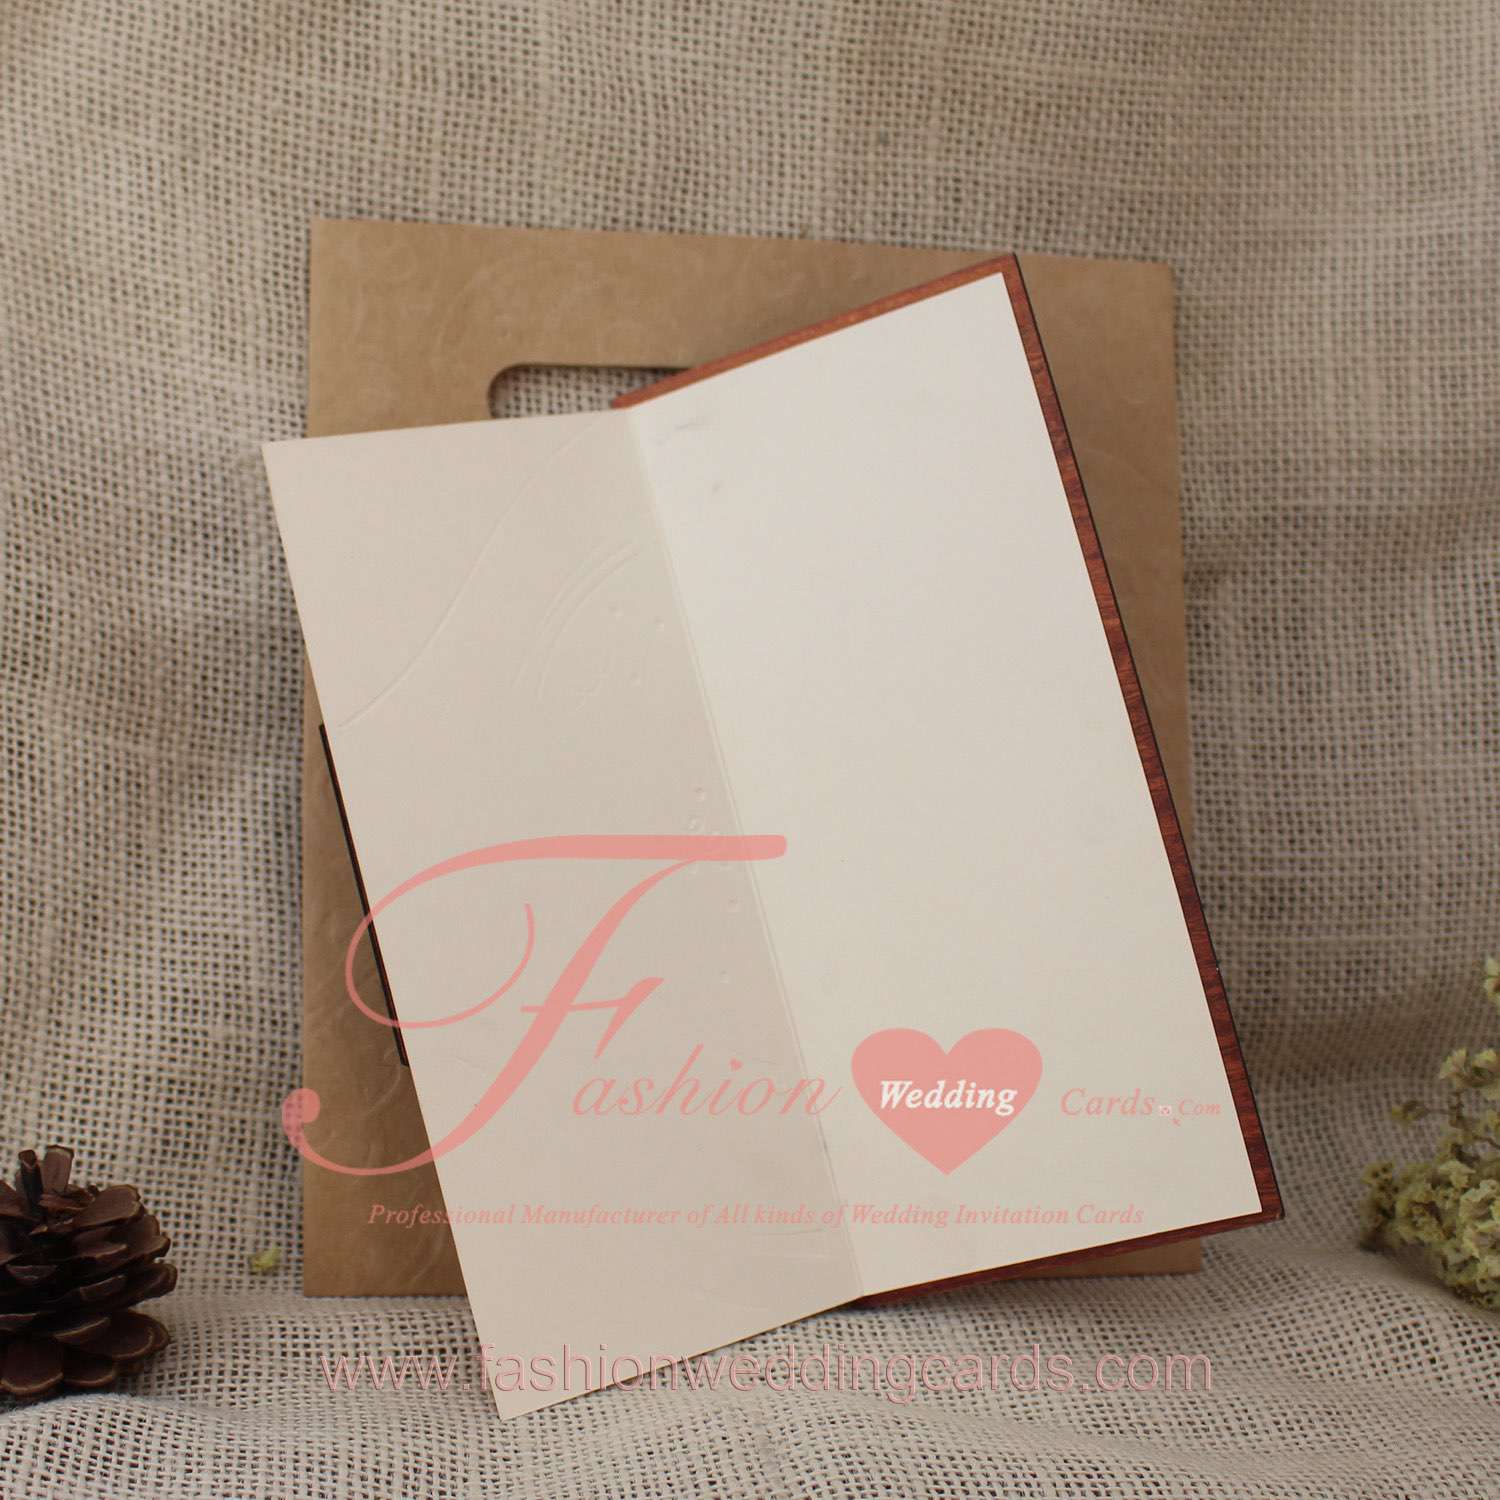 Personalised Cheap Indian Wedding Invitations with Wood Leaf